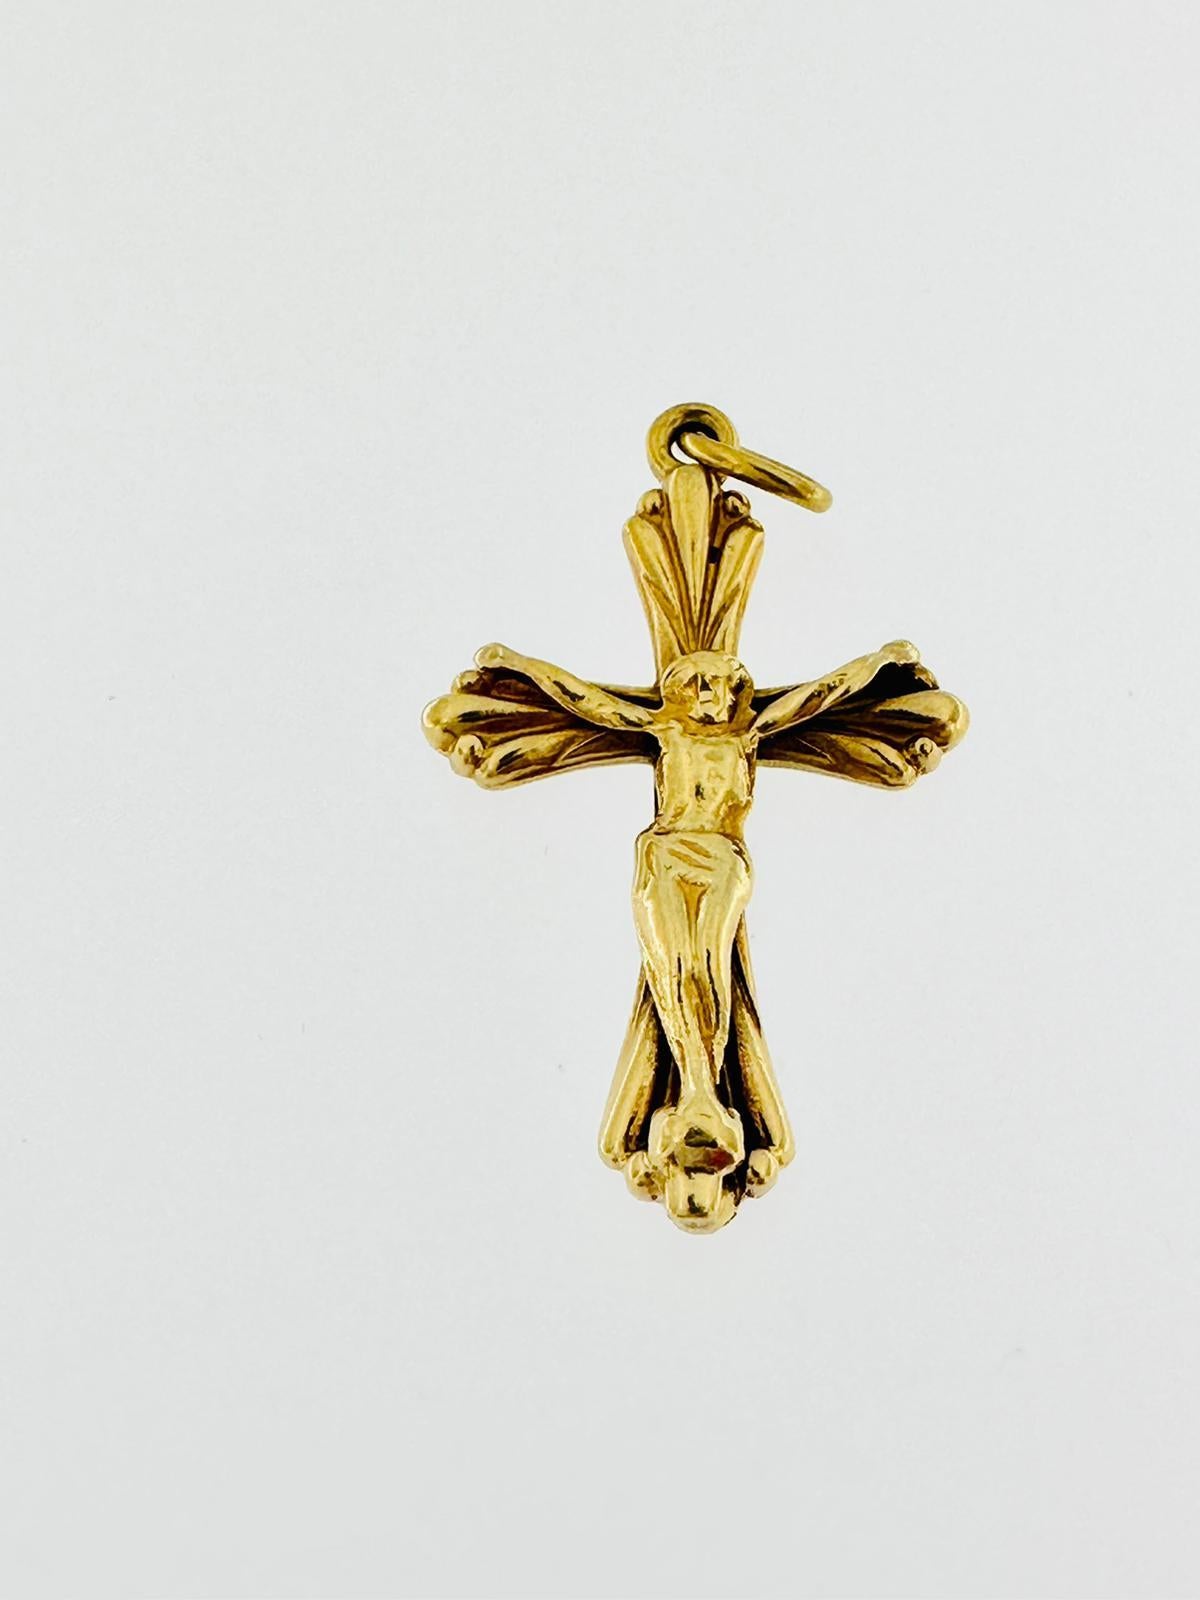 The Vintage 18kt Yellow Gold Spanish Crucifix is a religious artifact that features a crucifix design and is made of 18-karat yellow gold. Crucifixes are symbolic representations of the Christian cross with Jesus Christ depicted on it, emphasizing